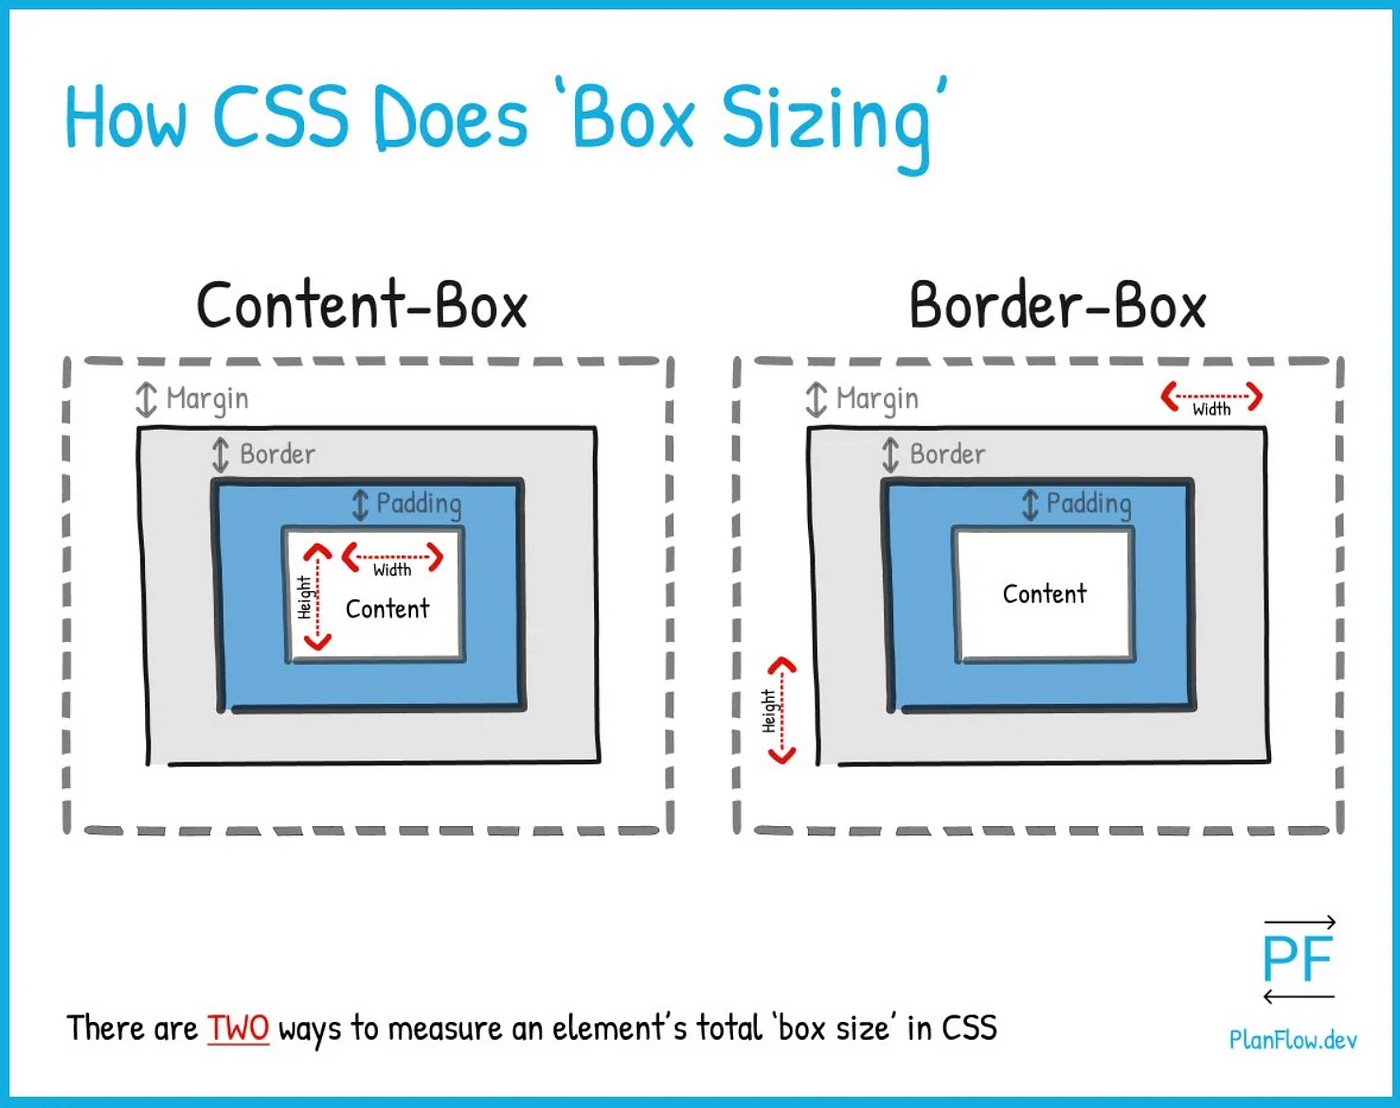 CSS box-sizing Explained. What is box-sizing in CSS and how does